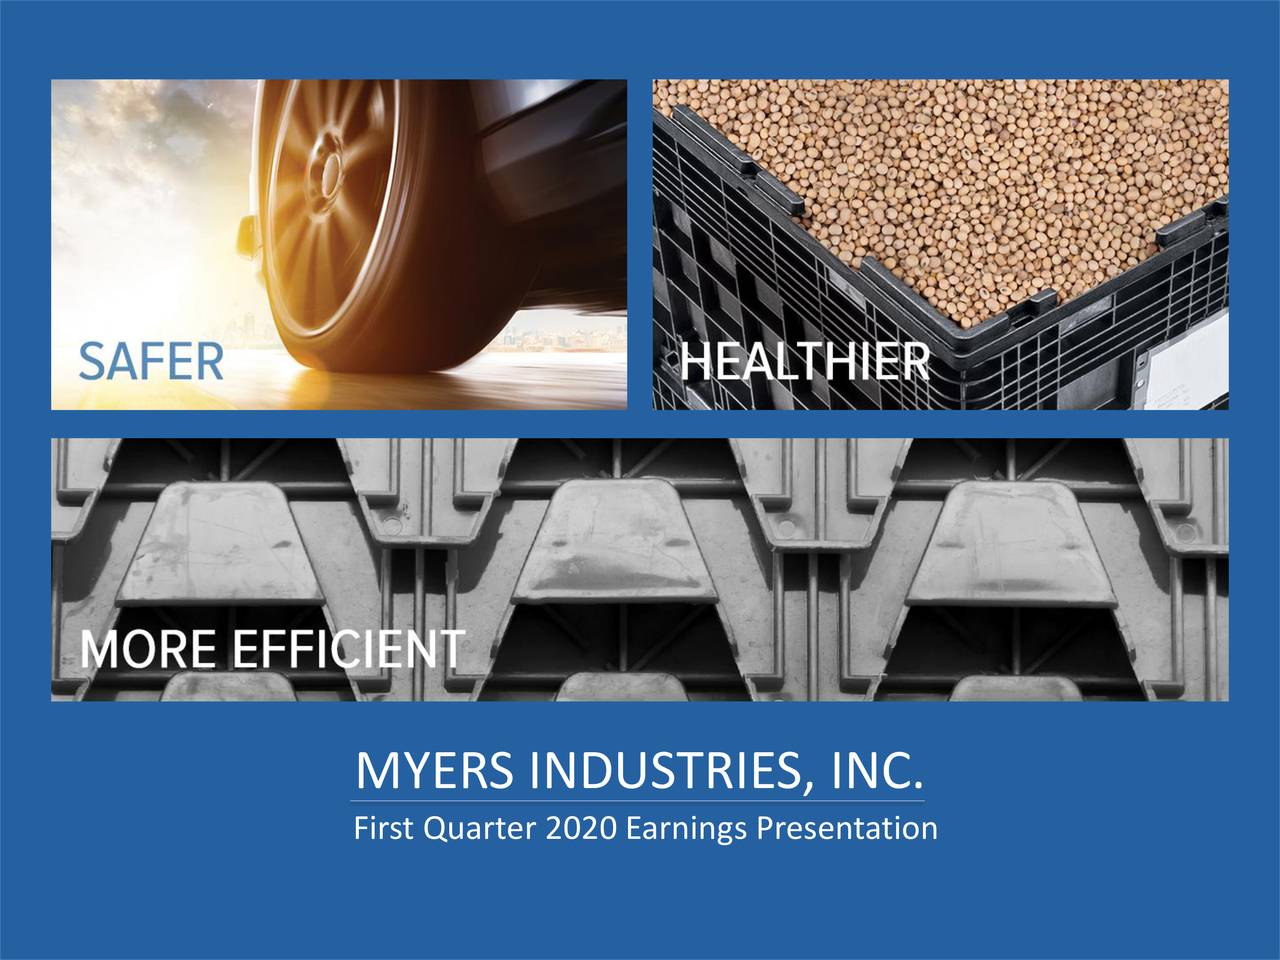 MYERS INDUSTRIES, INC.